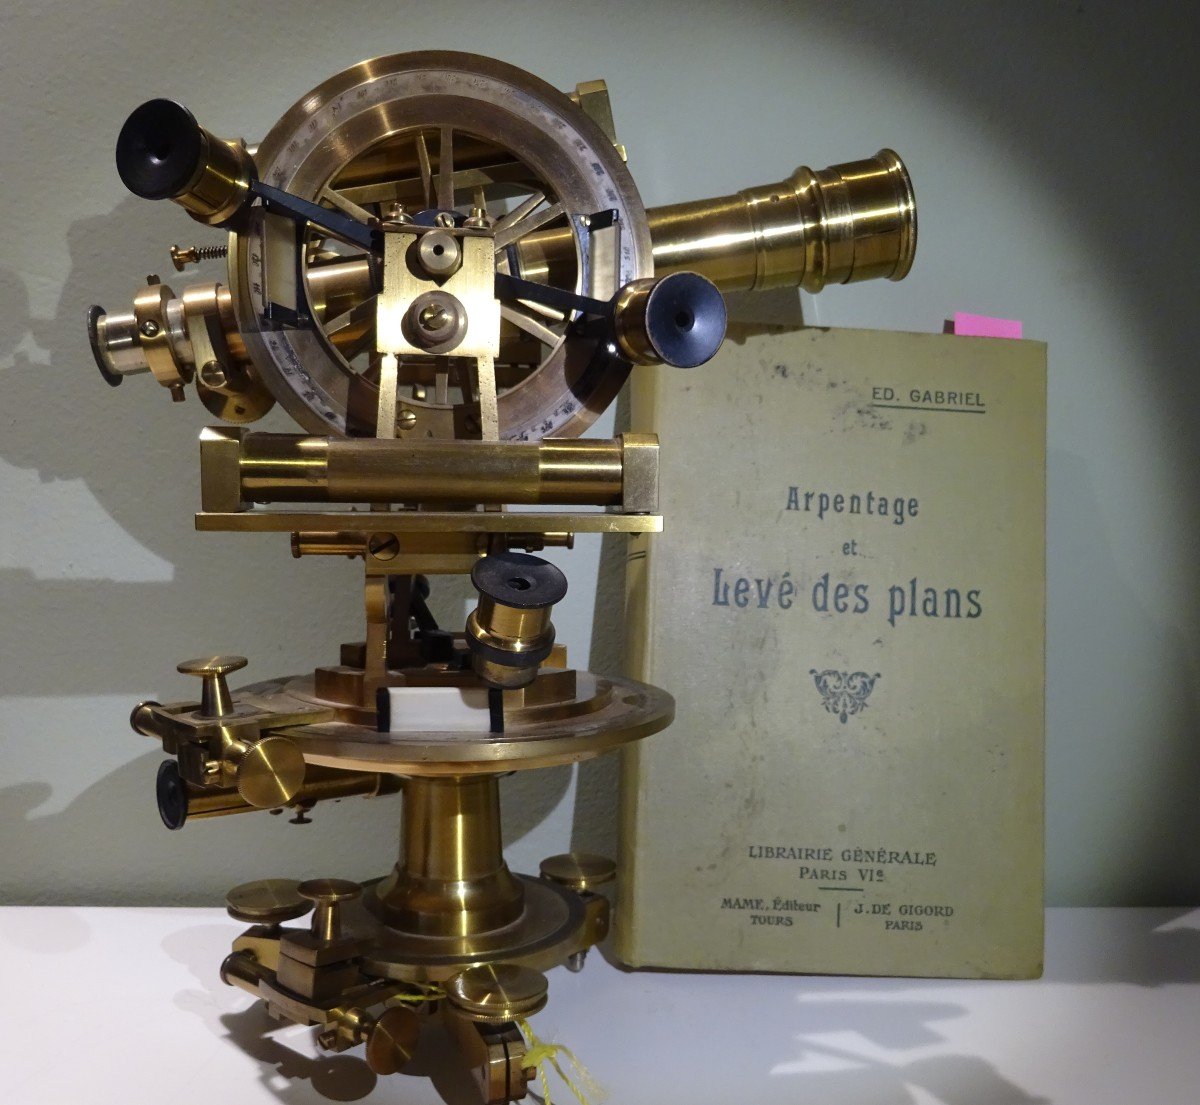 Theodolite And It's Not My Grandfather's First Name